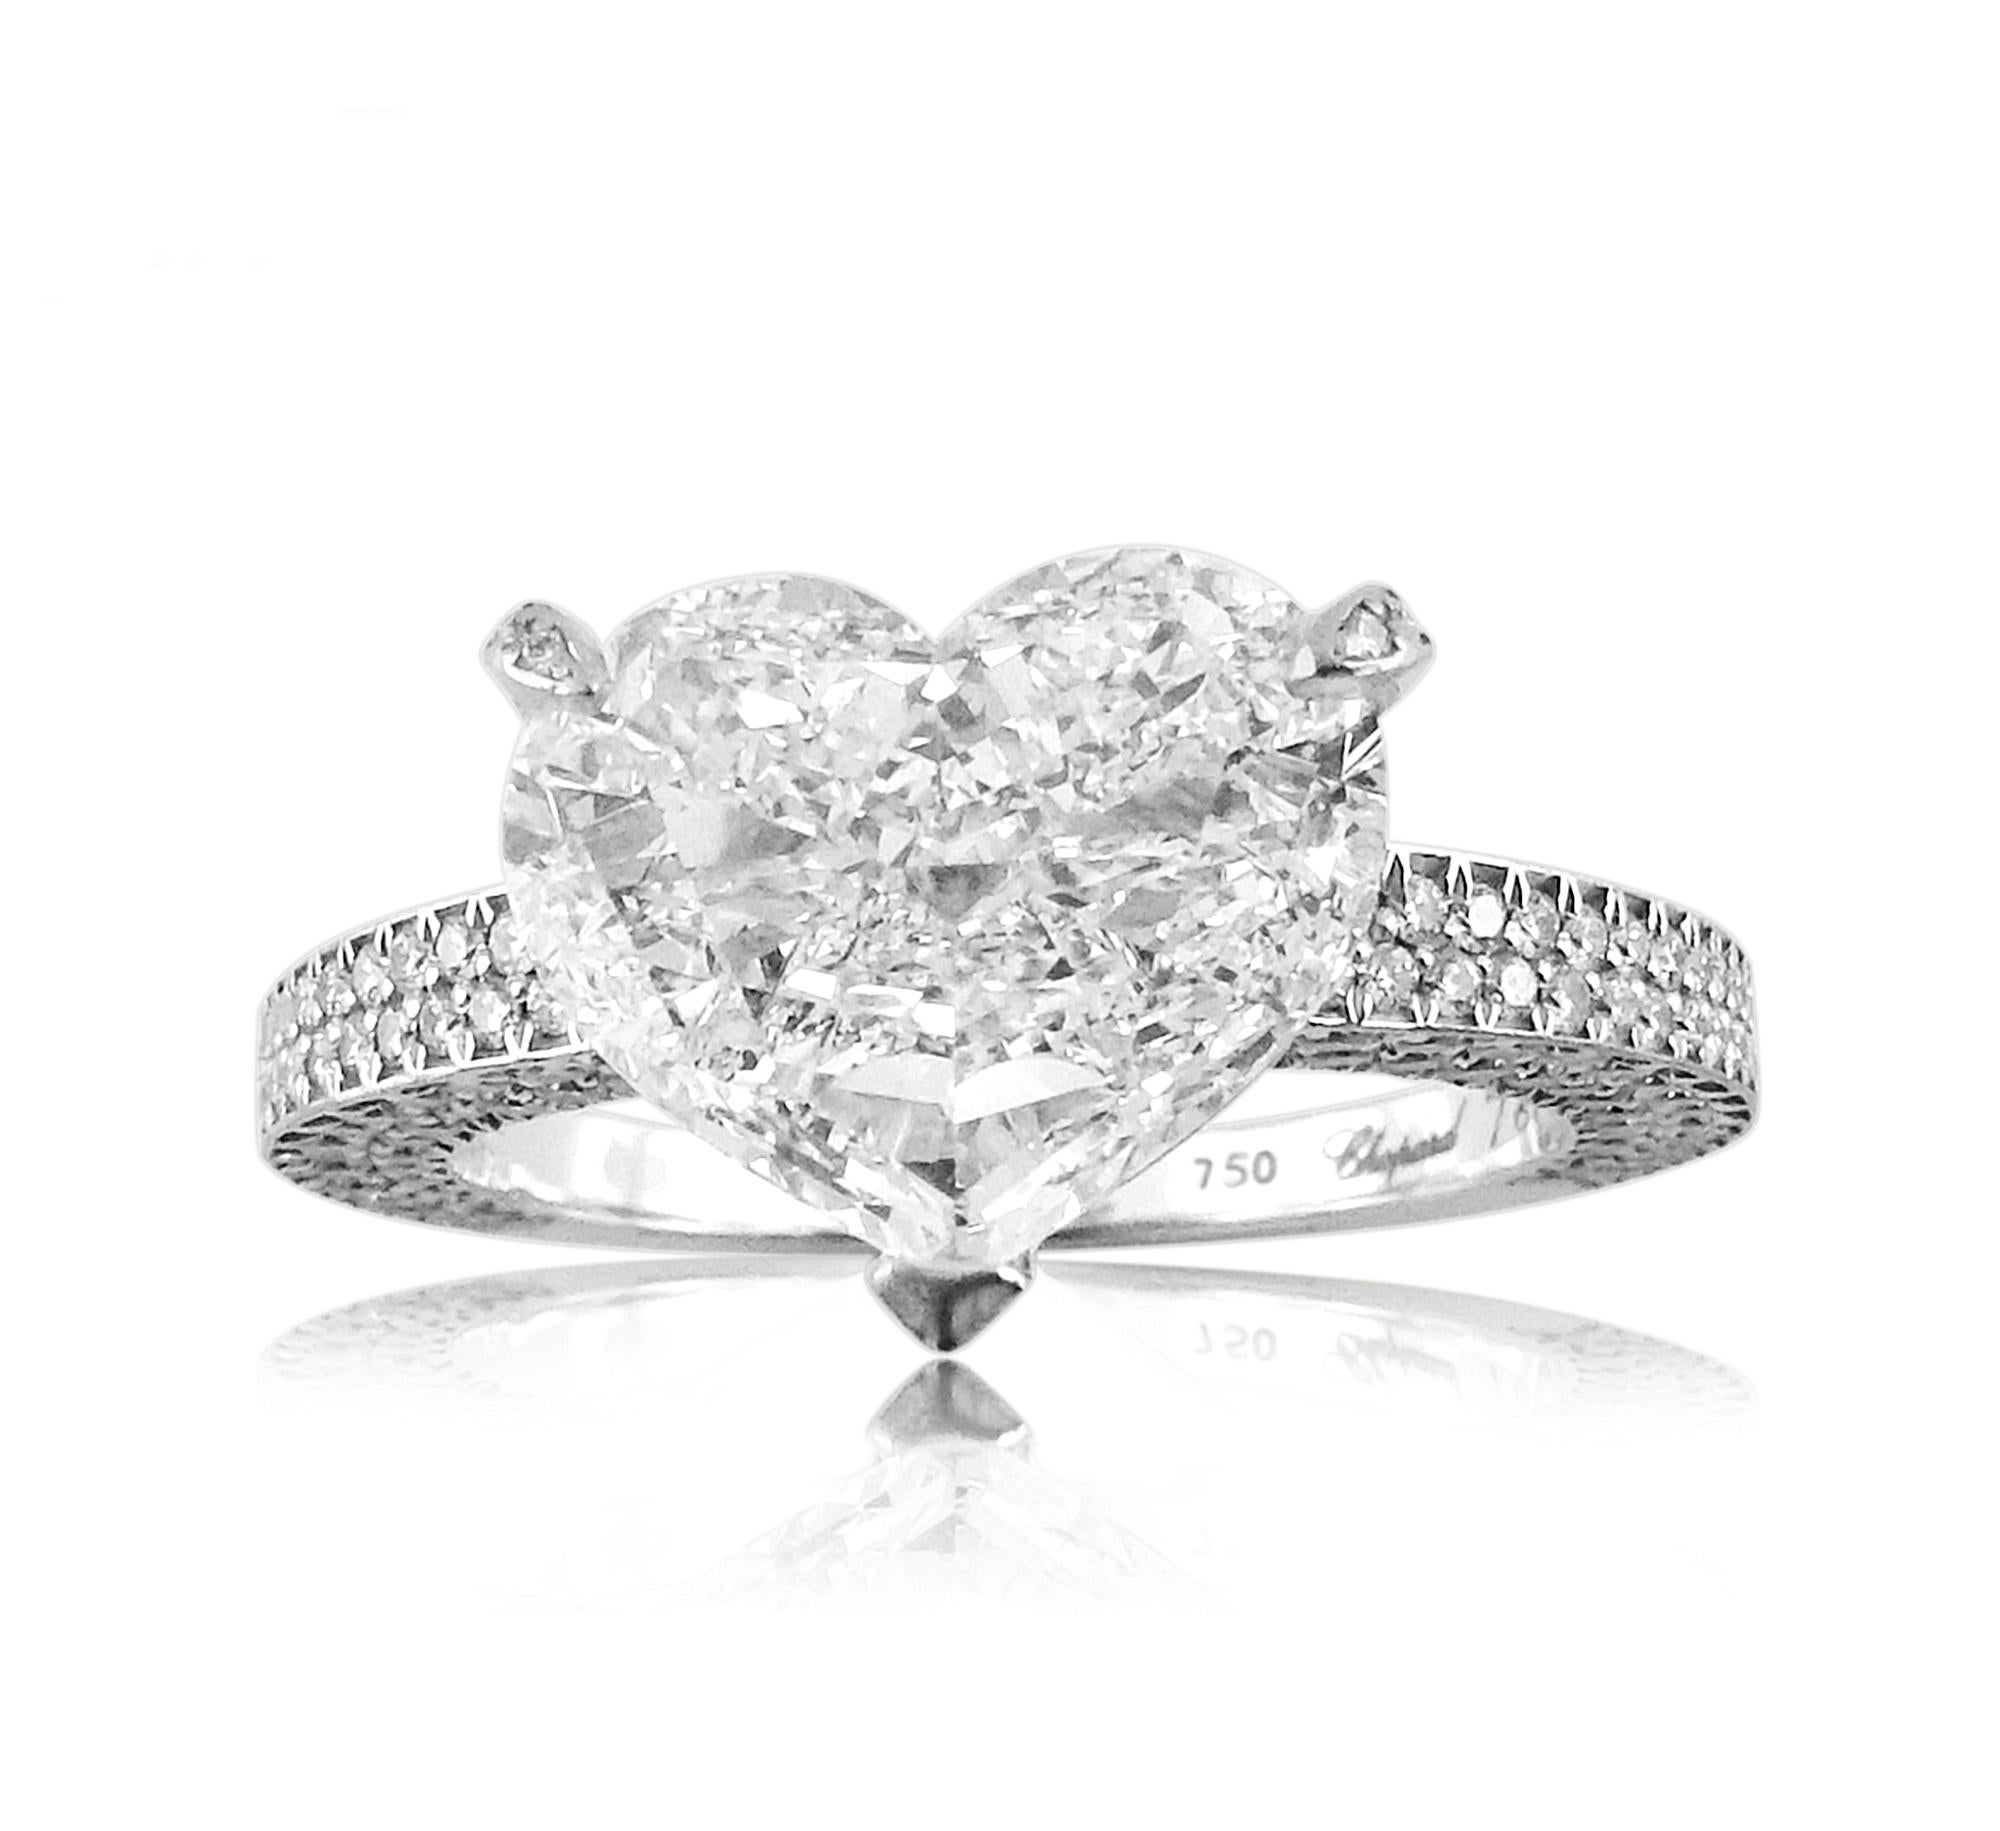 RRP: 194,220 CHF


Chopard Heart Shape Type IIa Diamond Ring - 3.93 ct


Set in Platinum


Total heart shape diamond weight: 3.00 ct
Color: D
Clarity: VVS2
Diamond is a type IIa

Total side diamond weight: 0.93 ct

[ 257 diamonds ]
GIA Certified